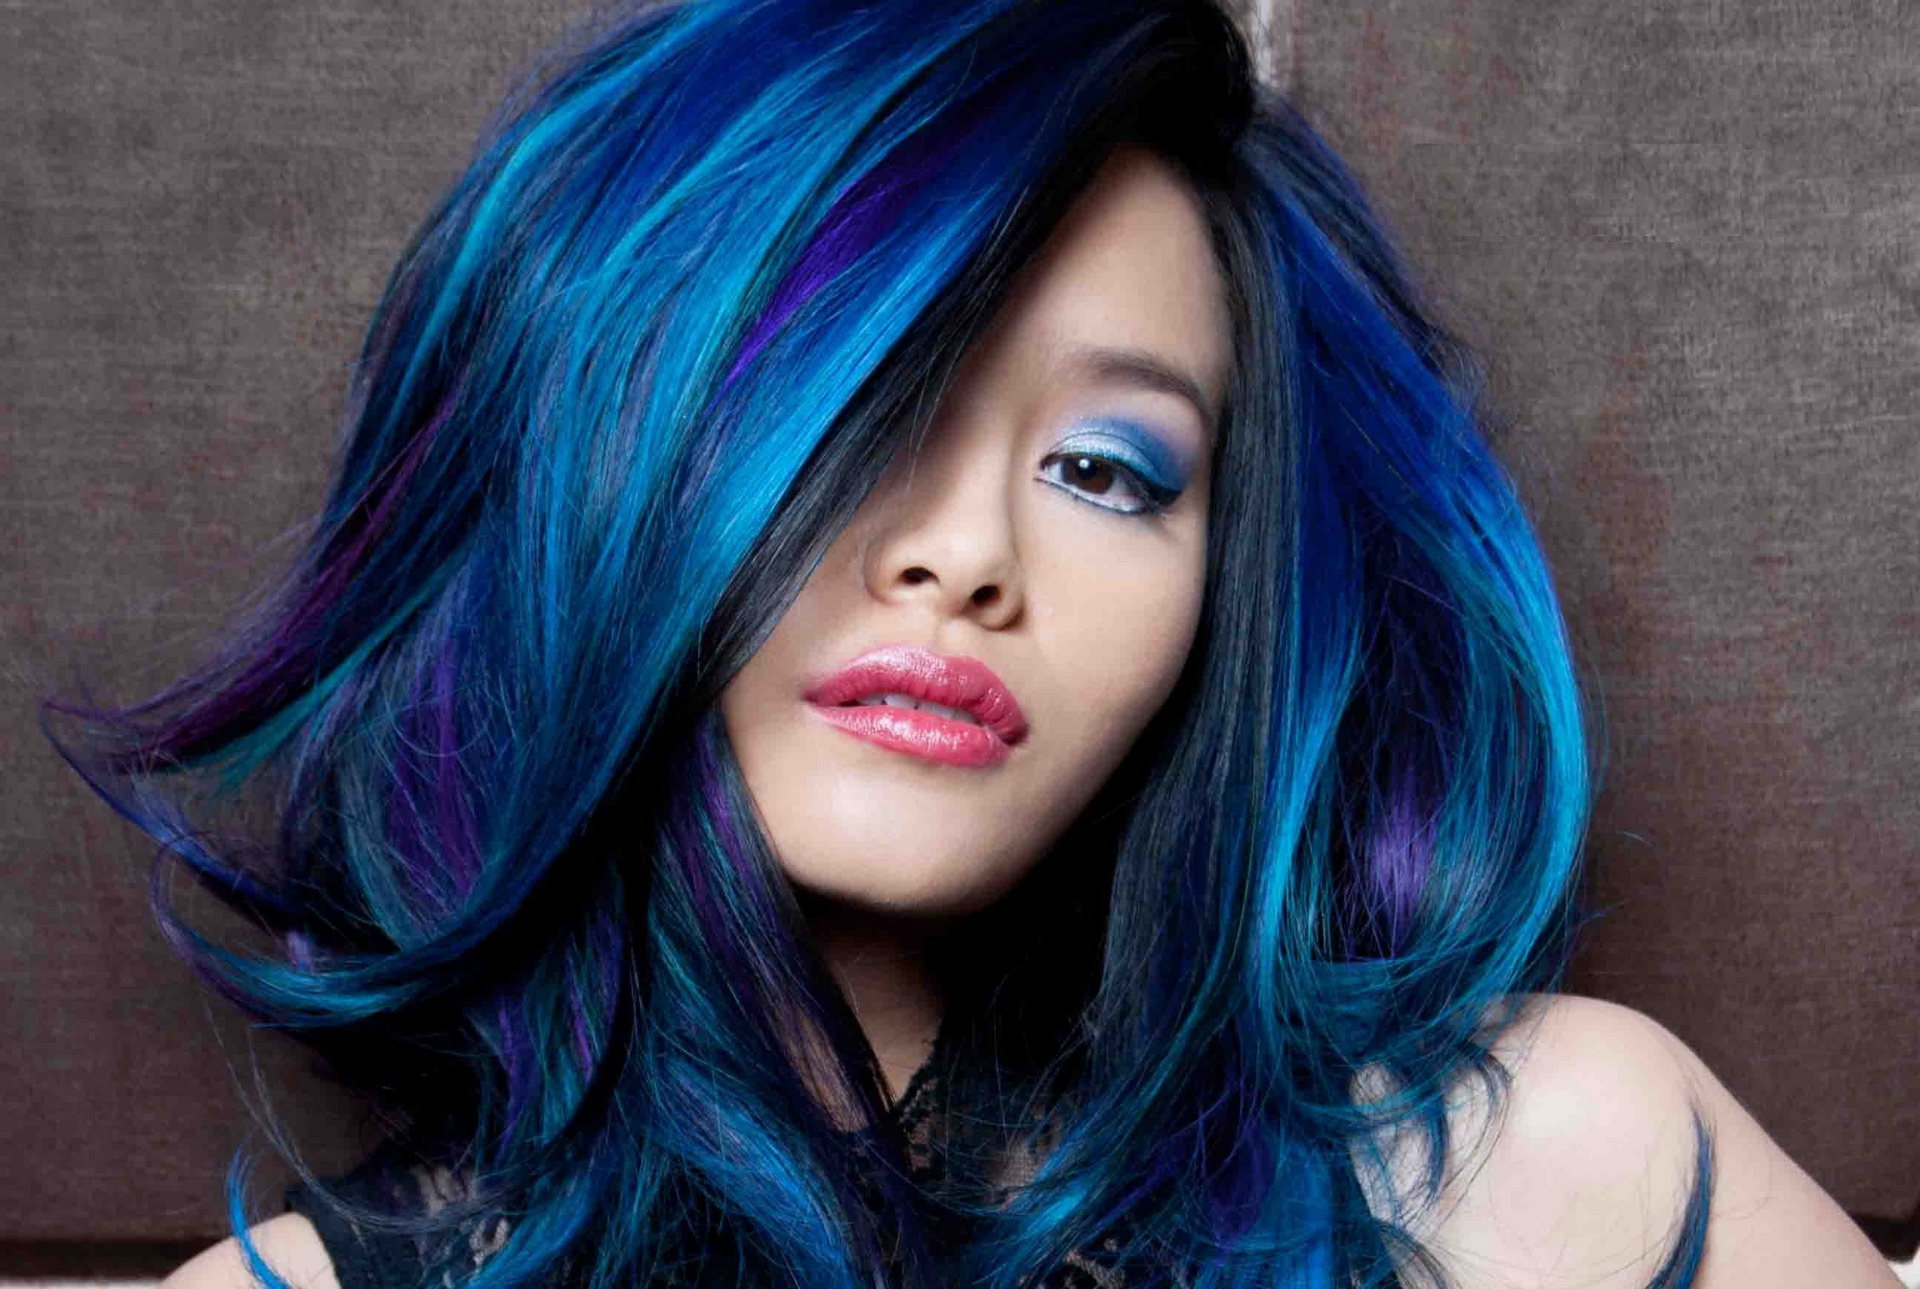 5. "The Science Behind Deep Royal Blue Hair Color" - wide 8